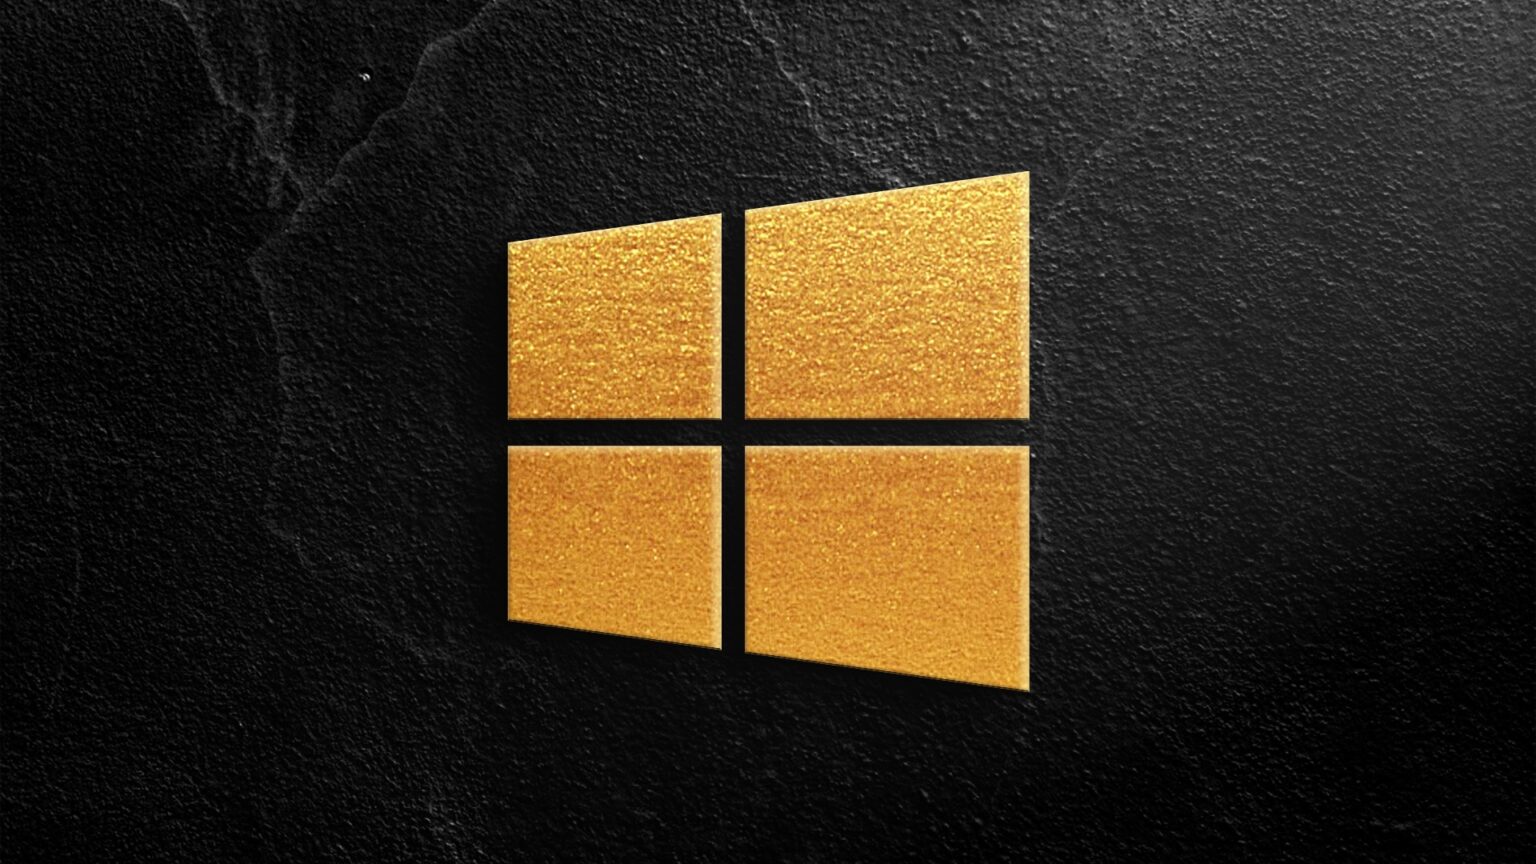 Windows 10 logo Save big-time on Microsoft software by using promo code CULT at CdkeySales.com.